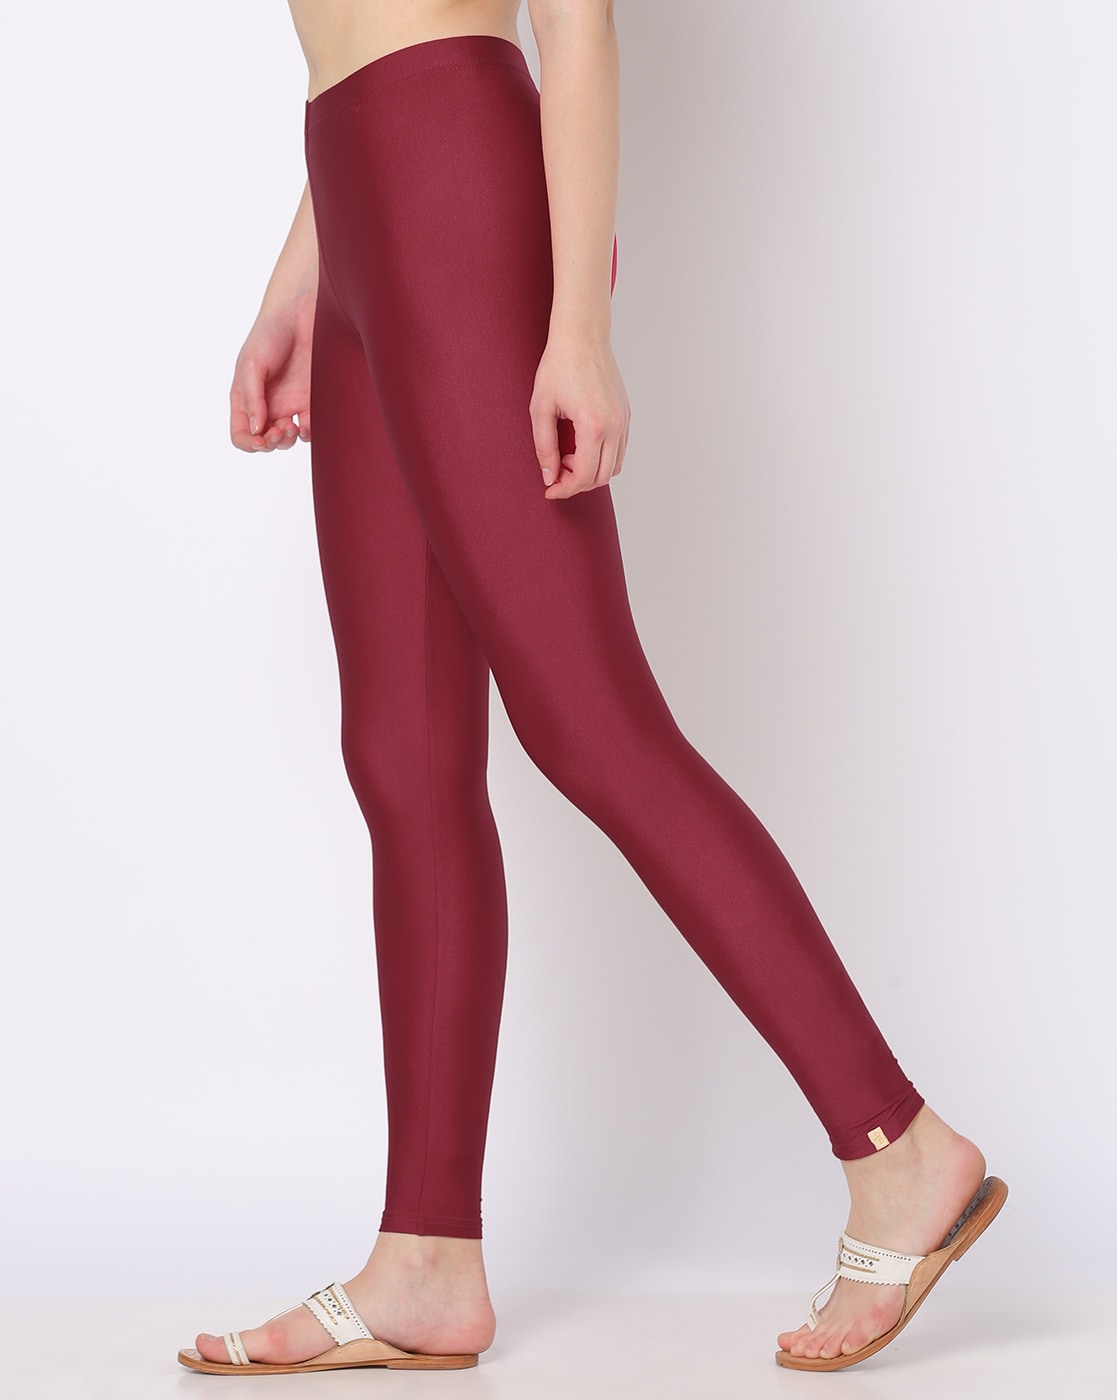 Avaasa Ankle Length Leggings in Rampur - Dealers, Manufacturers & Suppliers  - Justdial